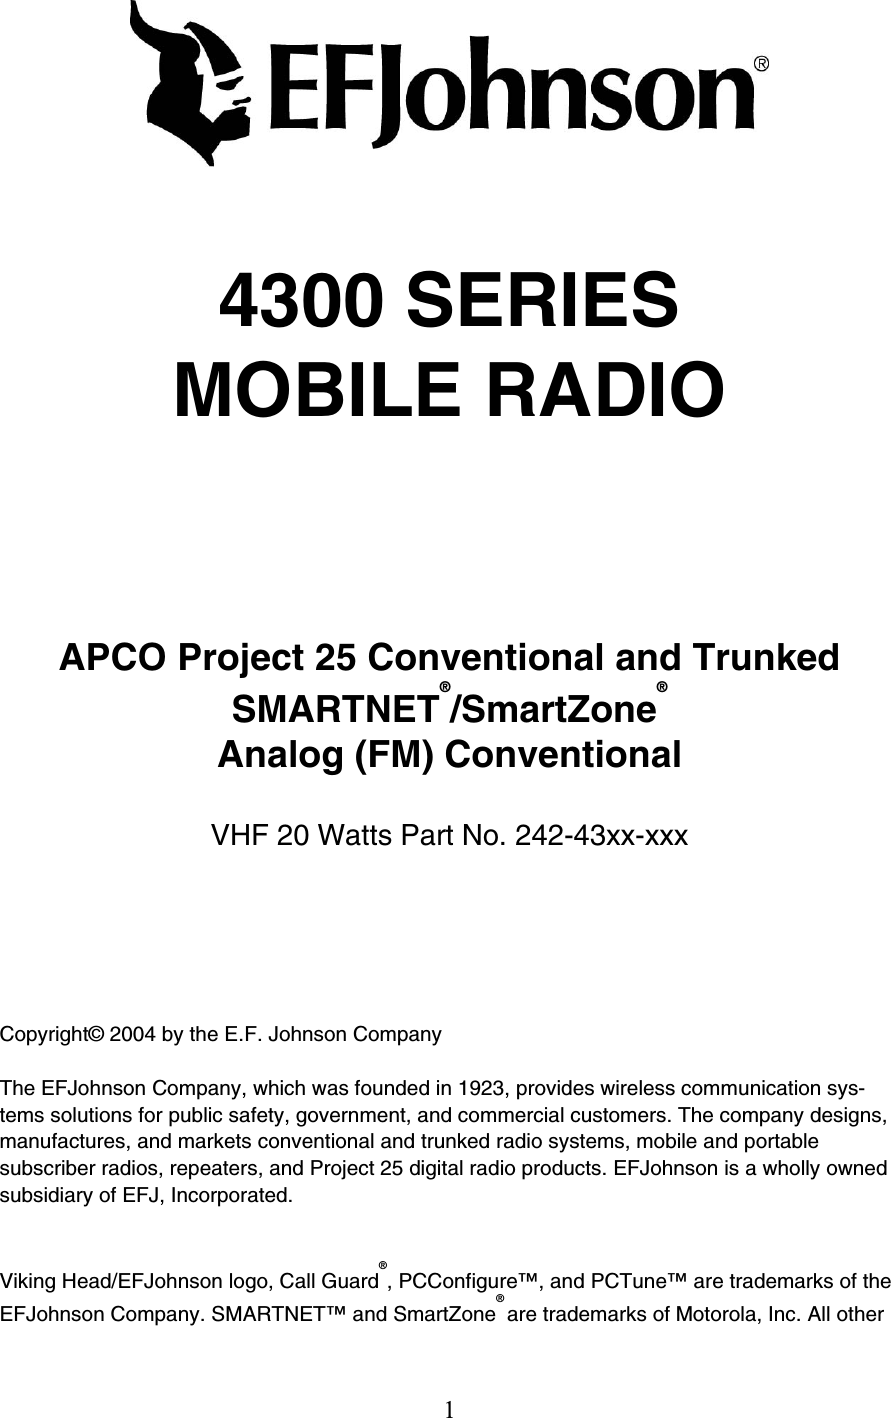 1  4300 SERIES MOBILE RADIO  APCO Project 25 Conventional and Trunked  SMARTNET®/SmartZone®  Analog (FM) Conventional  VHF 20 Watts Part No. 242-43xx-xxx  Copyright© 2004 by the E.F. Johnson Company  The EFJohnson Company, which was founded in 1923, provides wireless communication sys-tems solutions for public safety, government, and commercial customers. The company designs, manufactures, and markets conventional and trunked radio systems, mobile and portable subscriber radios, repeaters, and Project 25 digital radio products. EFJohnson is a wholly owned subsidiary of EFJ, Incorporated.  Viking Head/EFJohnson logo, Call Guard®, PCConfigure™, and PCTune™ are trademarks of the EFJohnson Company. SMARTNET™ and SmartZone® are trademarks of Motorola, Inc. All other 